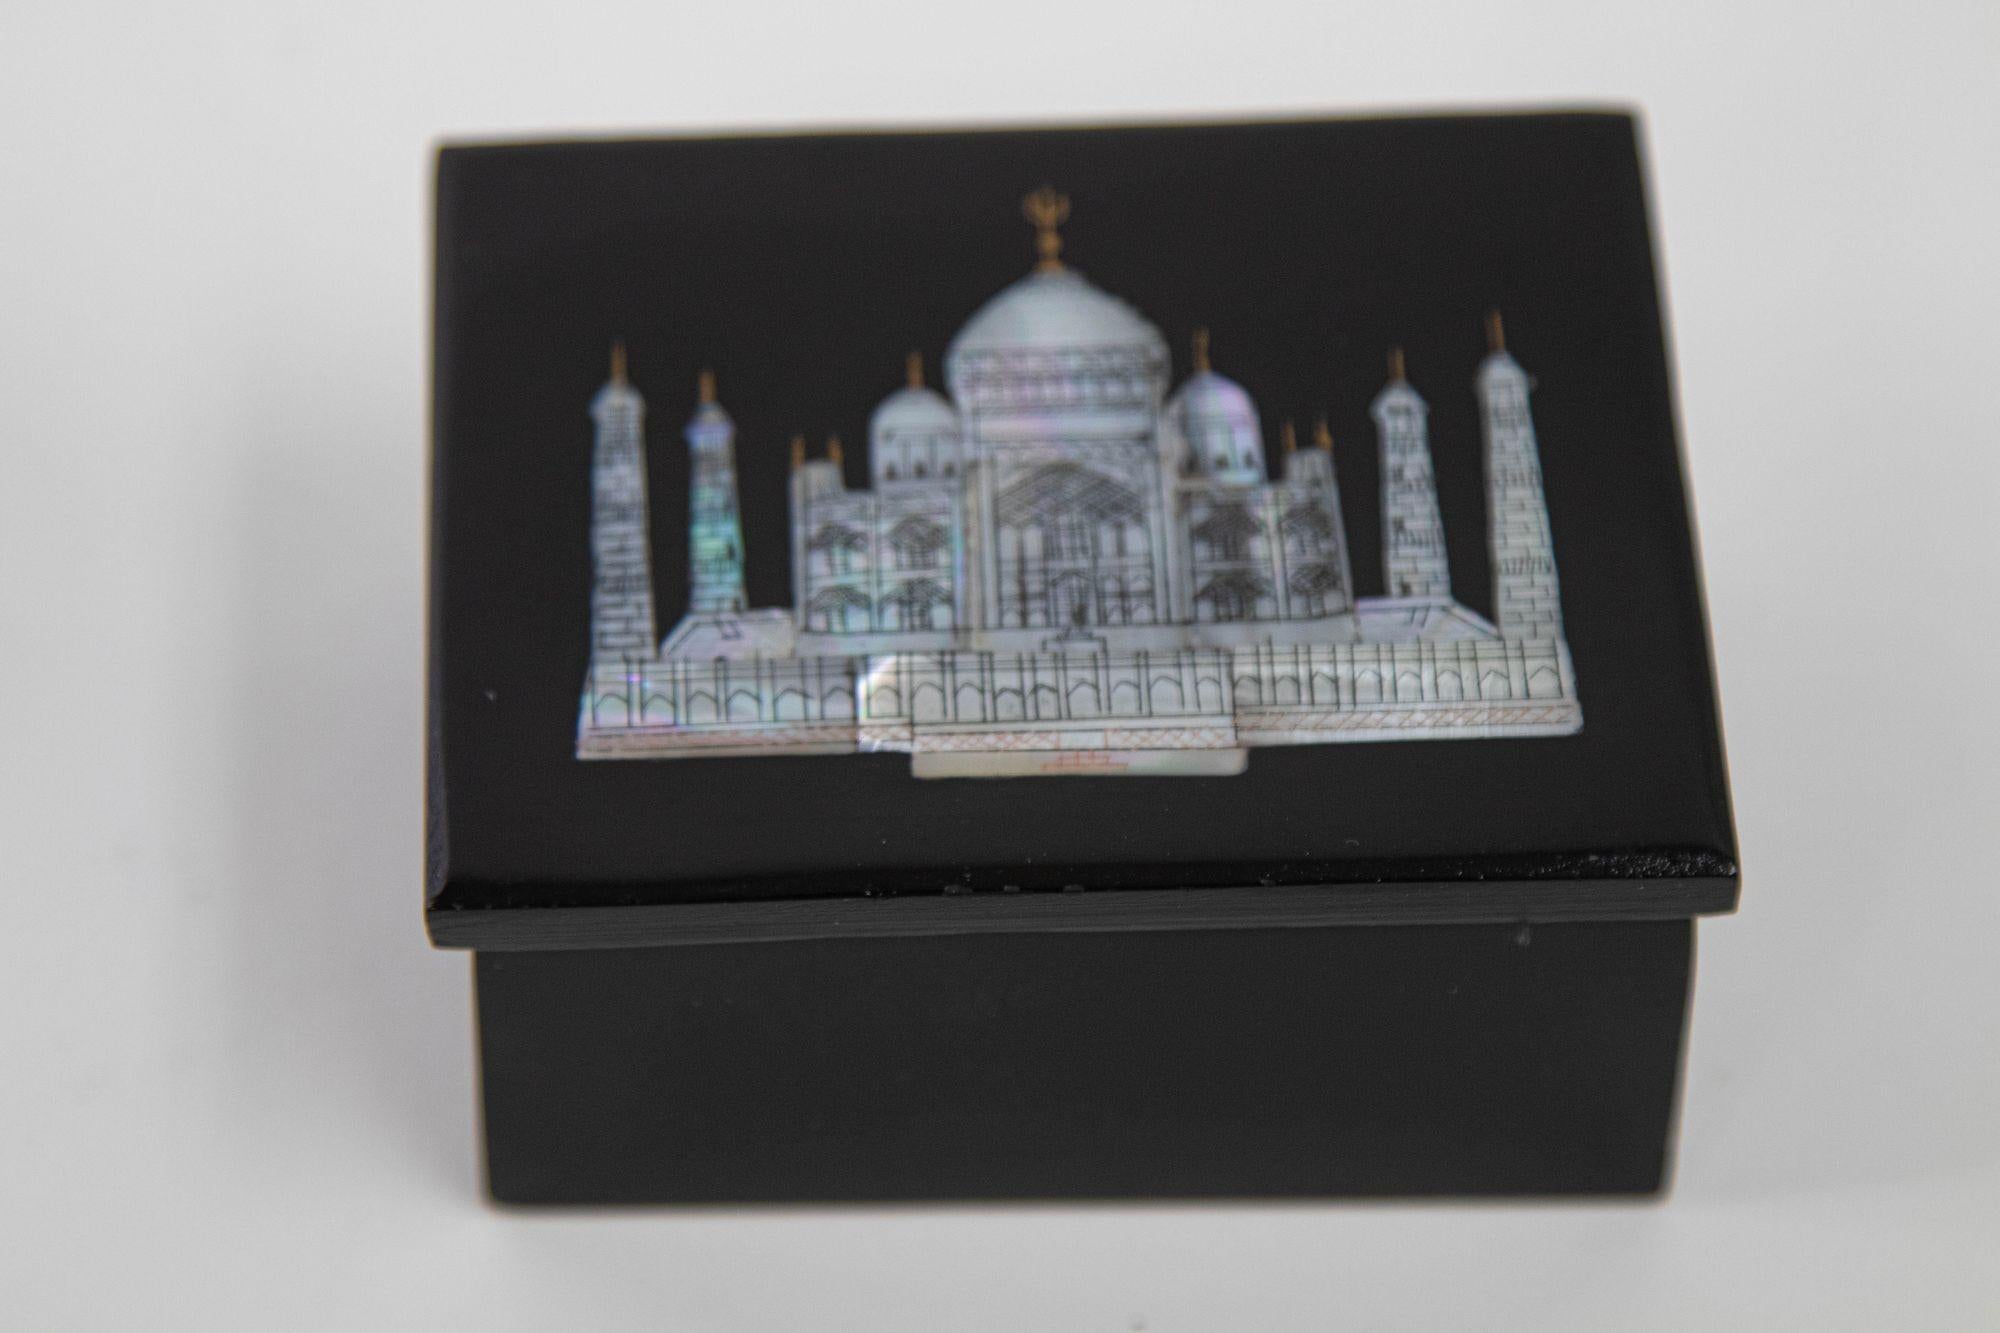 1950's Agra Indian Mother of Pearl and Black Marble Box with The Taj Mahal Inlays.Onyx Black Marble Box with Pietra Dura Intricate Mother of Pearl Inlay of the Taj Mahal.Fine Quality Mother of Pearl Inlaid Taj Mahal Box.Black marble trinket box with